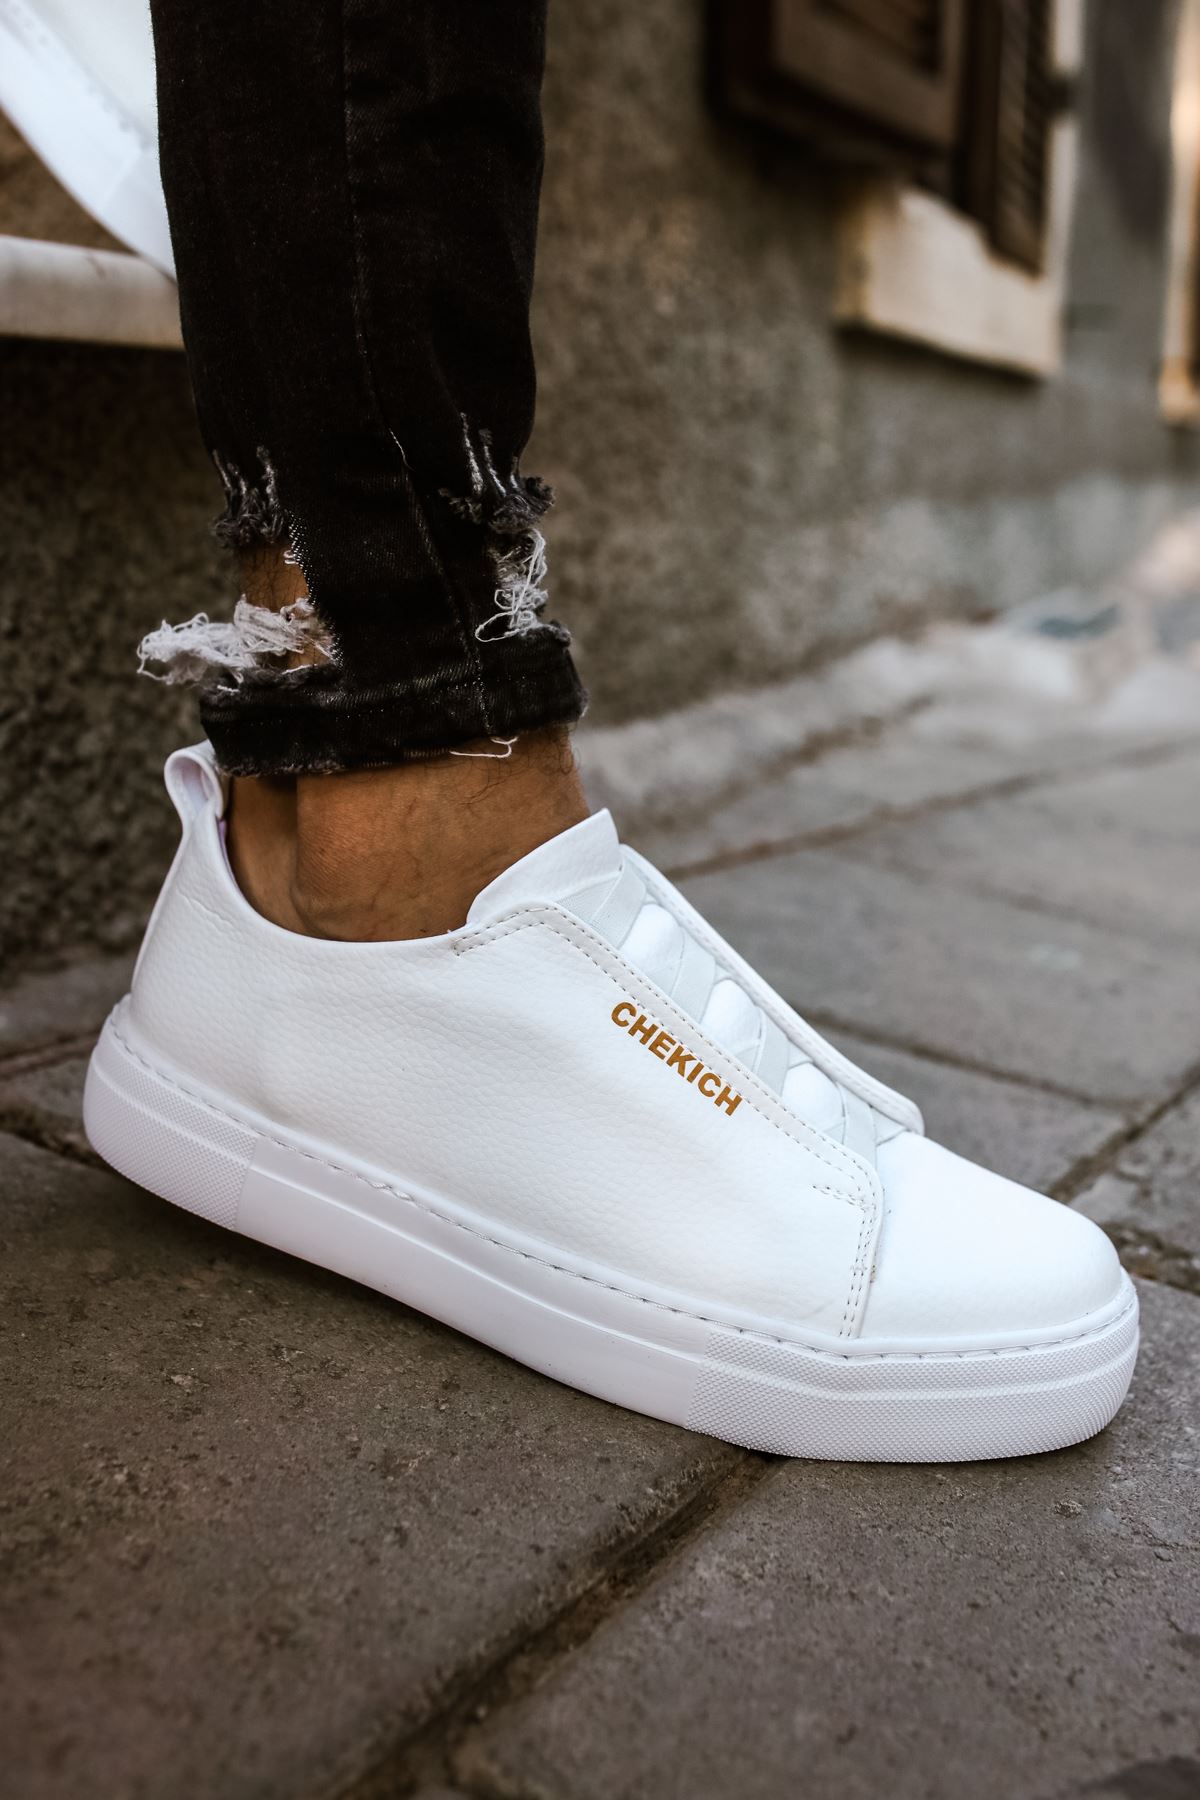 Chekich Men Sneakers Tan Artificial Leather Summer Fashion Elastic Band Casual Shoes Wedding Odorless Slip-On White Outsole Office Vulcanized Footwear Fabric Lightweight Air Breathable Flat Suits Formal CH013 V5